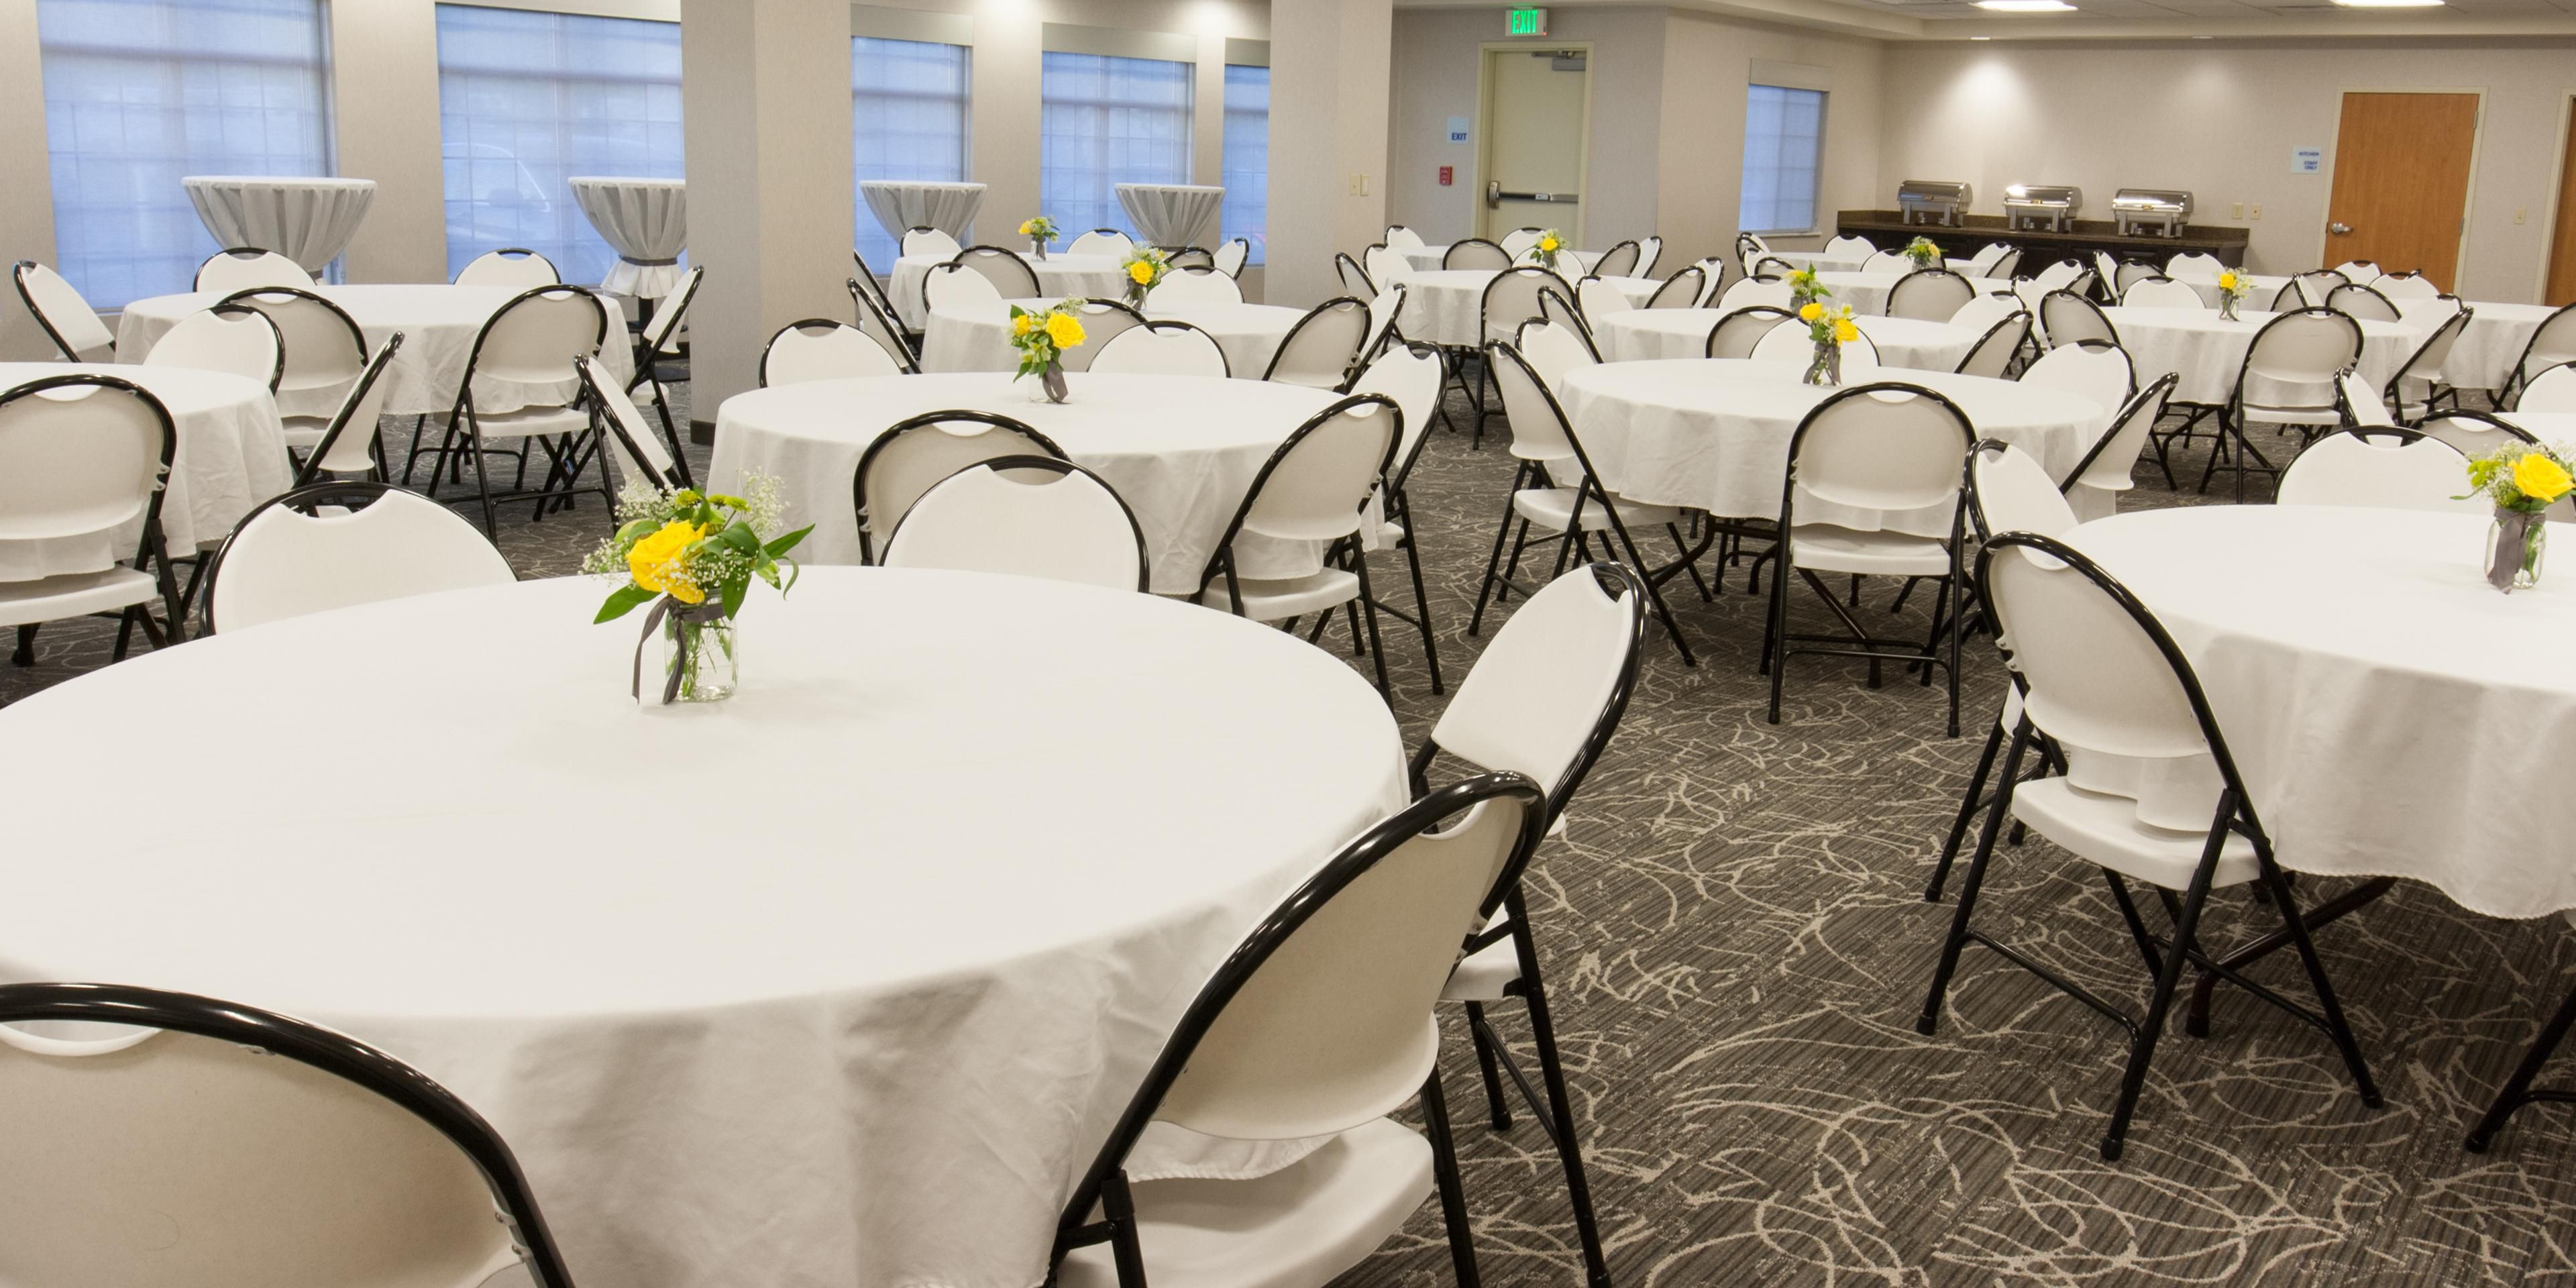 We have a 2000 sq.ft. ballroom with a capacity of 200 people that can be used for Weddings, Receptions, Baby Showers, Memorial Services, Business Meetings, or Classes. If you don’t need quite as much room, we have smaller Conference room setups and a Boardroom. We can also add a pool reservation to an Event Space booking for Birthday Parties.